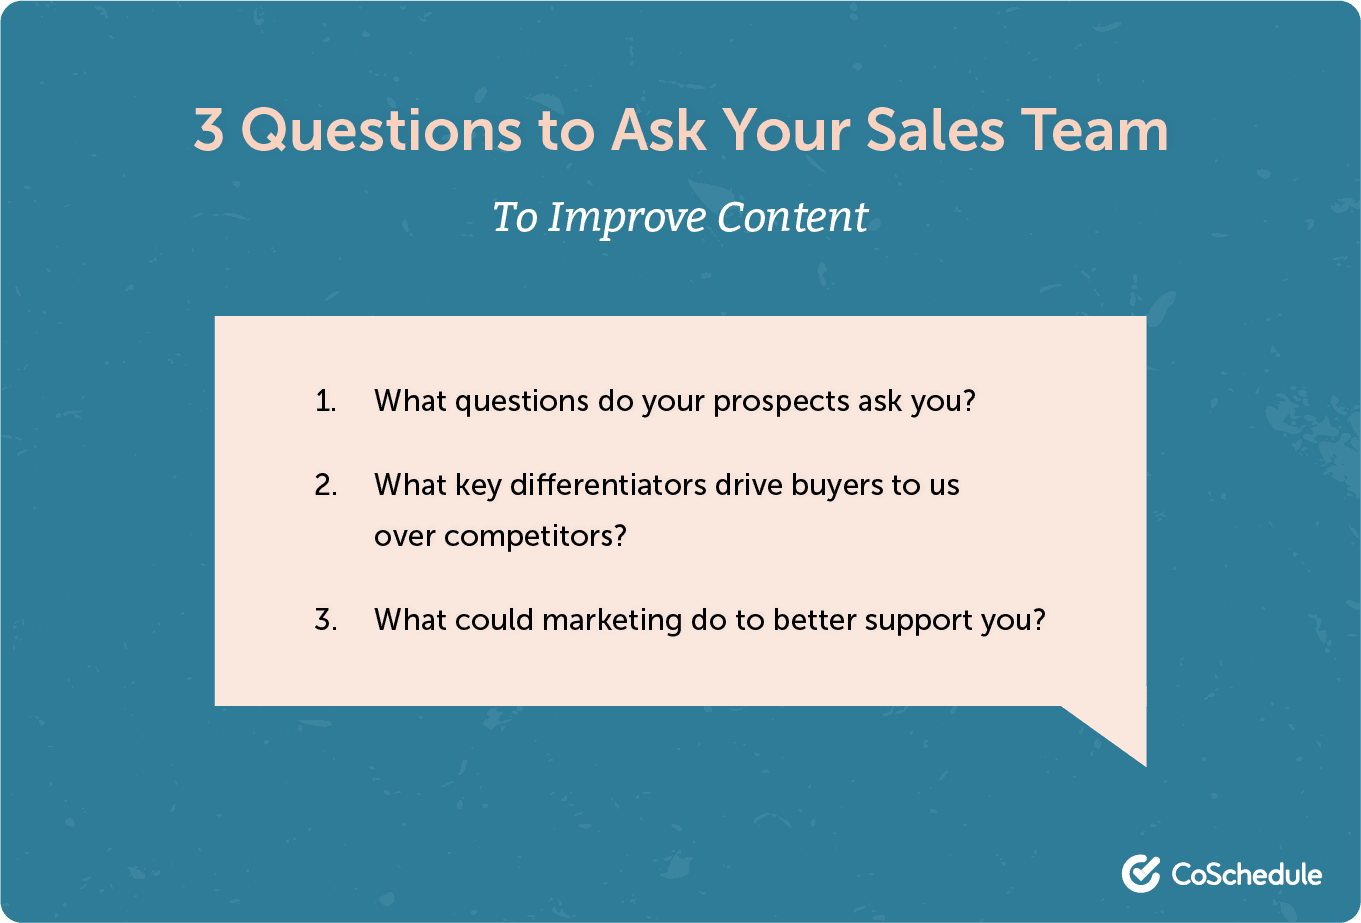 Questions to ask your sales team to improve content